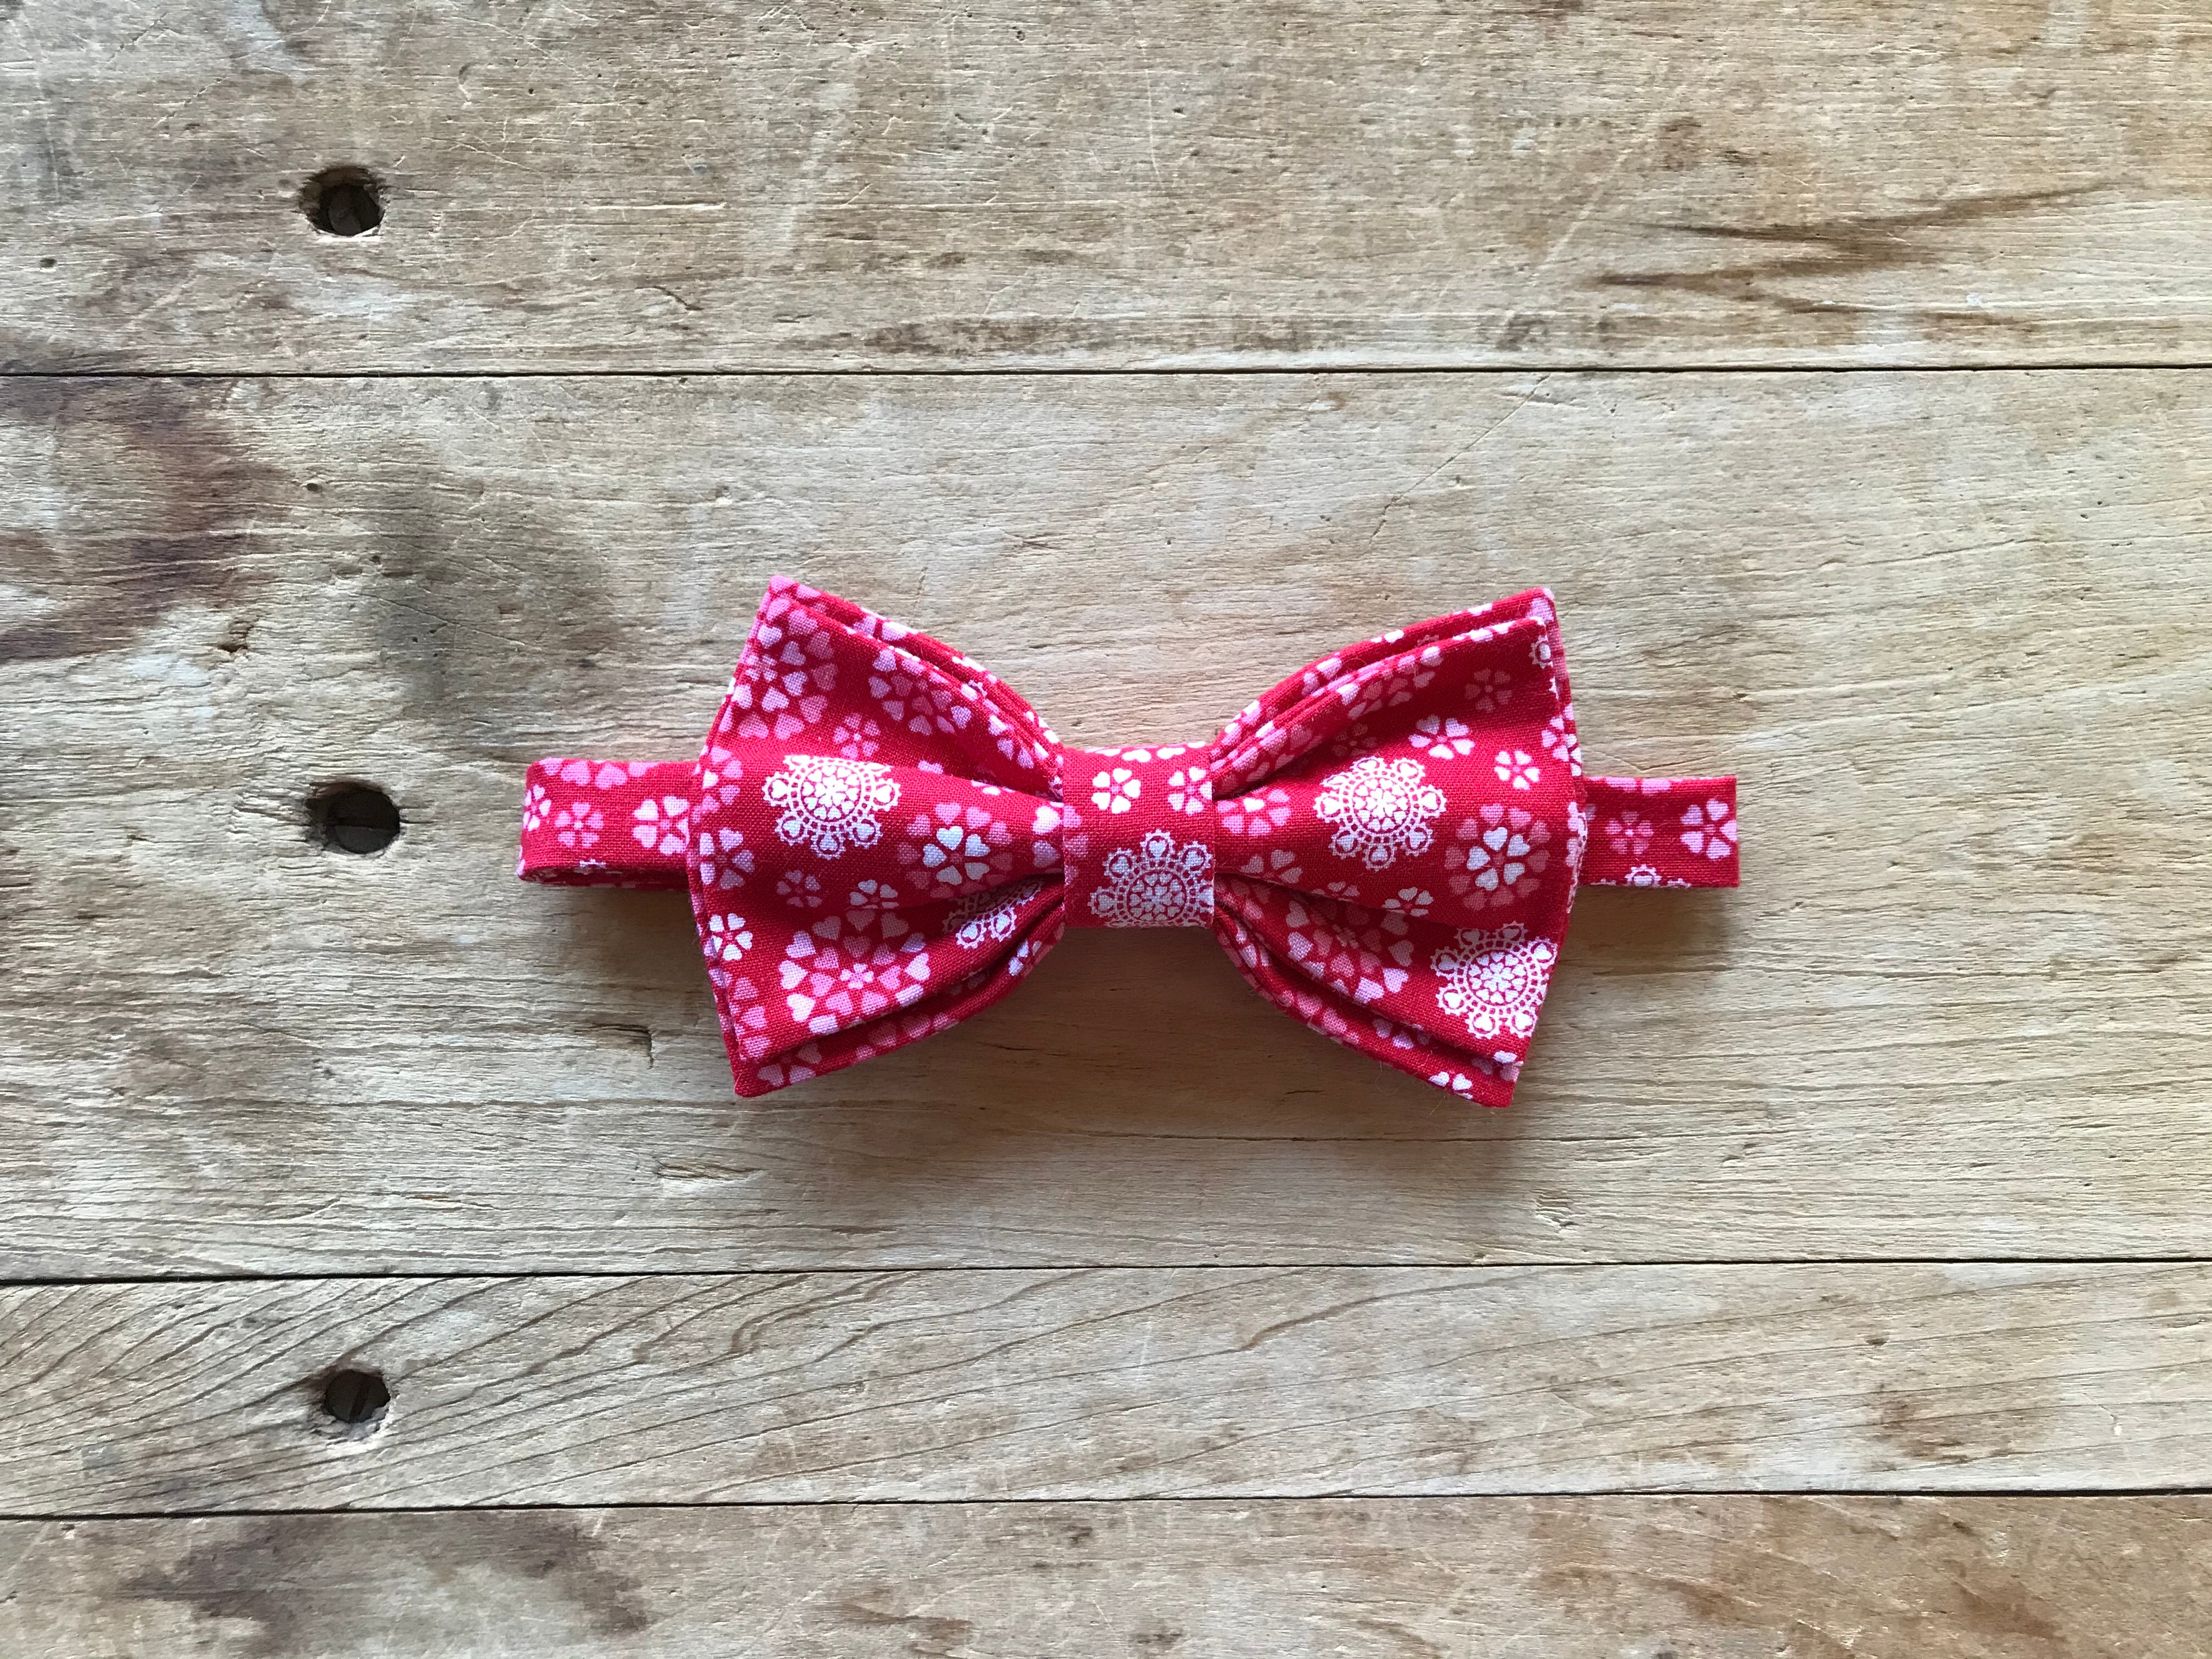 Valentine’s Day Hugs and Kisses Bow Tie, Pocket Square, and Lapel Pin